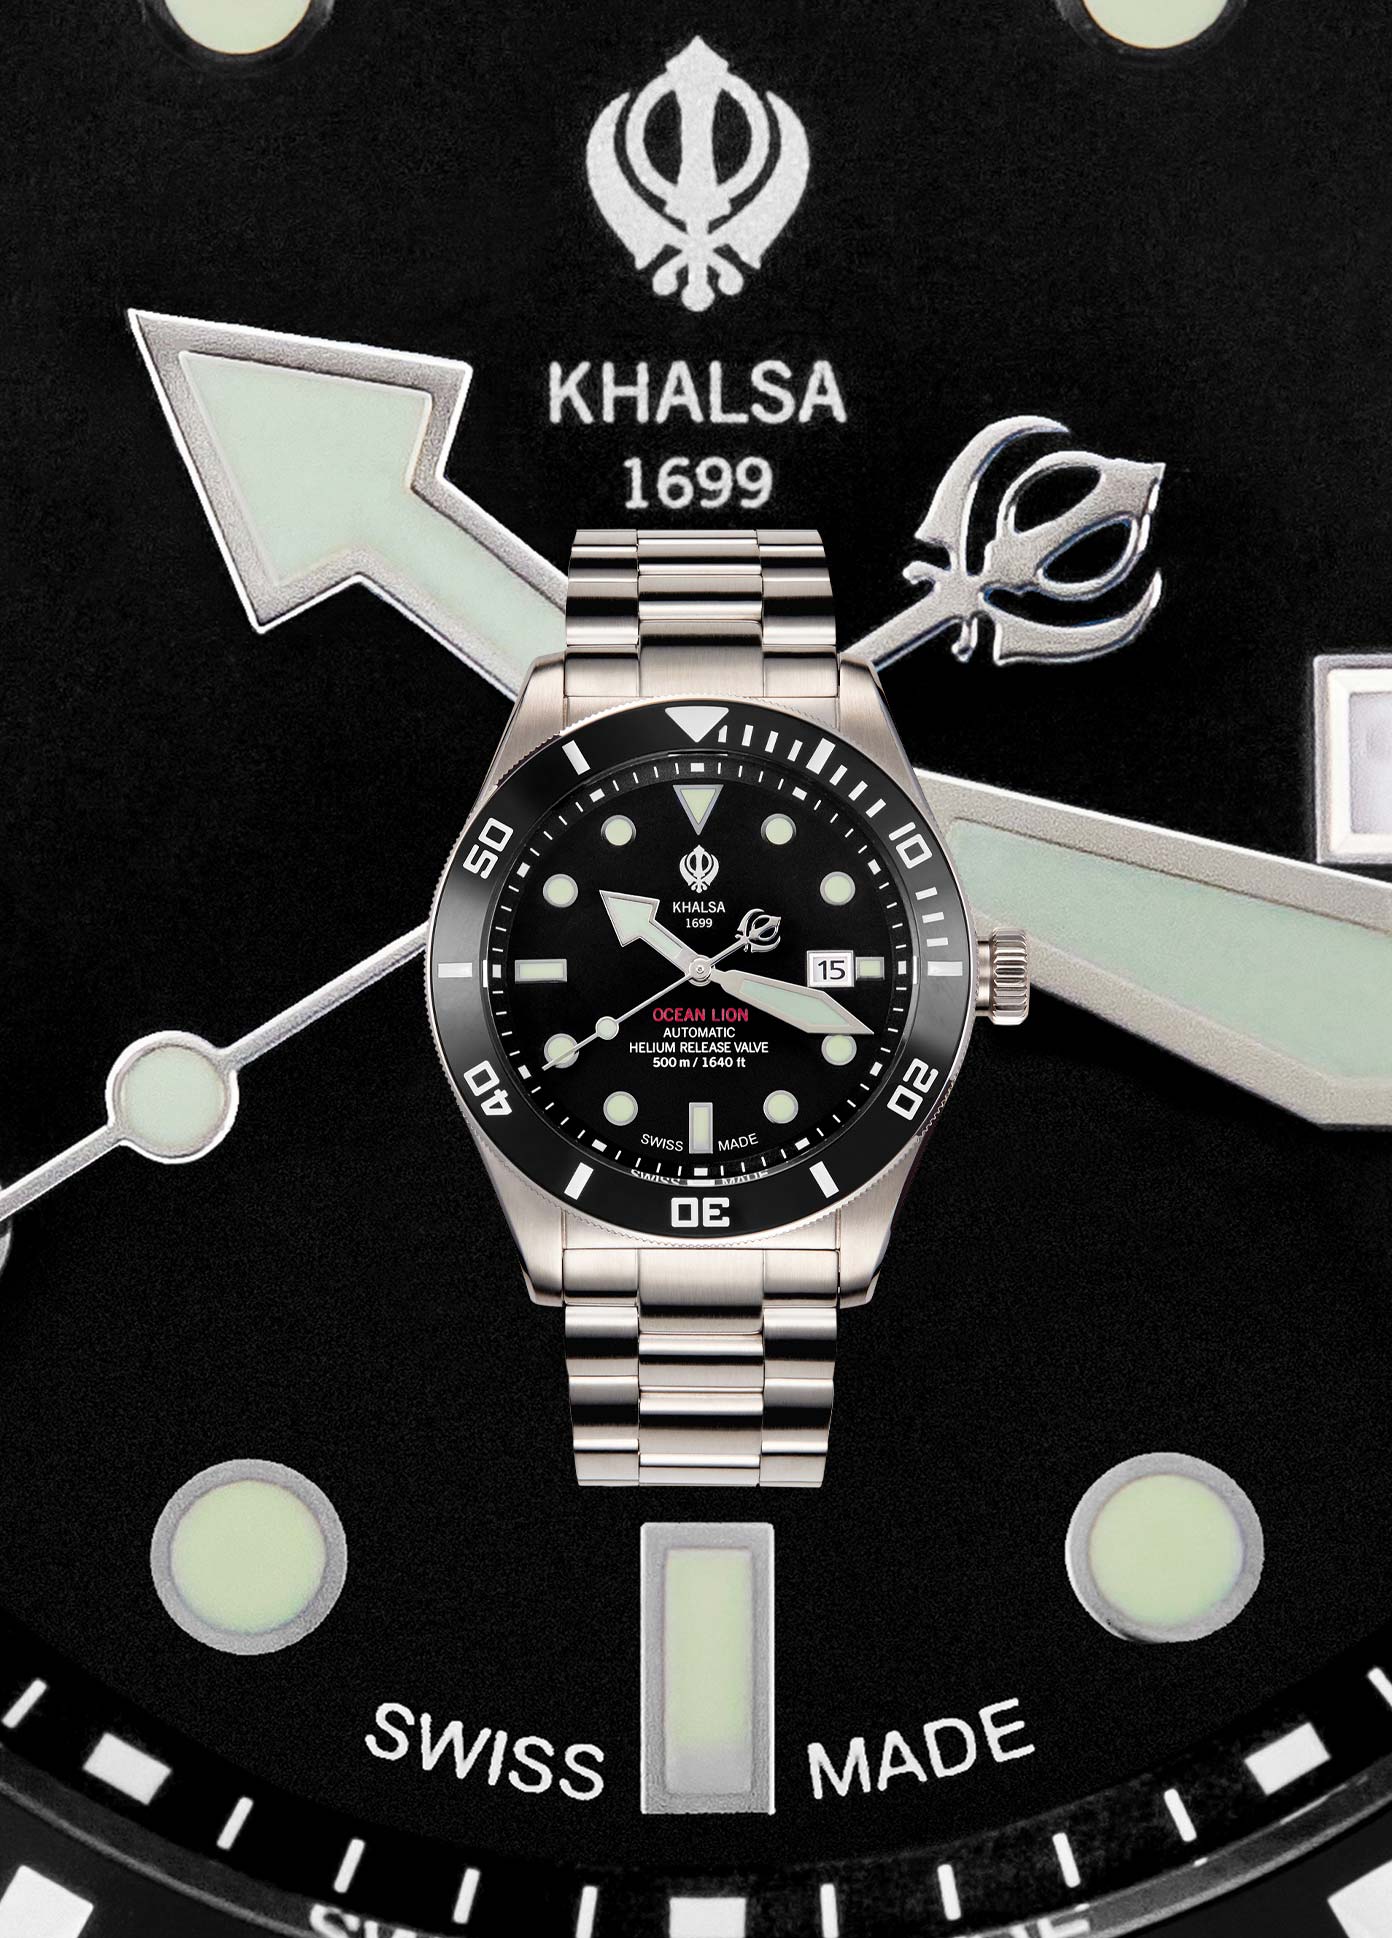 House of Khalsa Ocean Lion Abyss Black Luxury Sikh Dive Watch with Khanda Sahib Symbol, Stainless Steel, Swiss Movement, Luminous Dial, Ceramic Bezel, Helium Release Valve - Priceless and Timeless